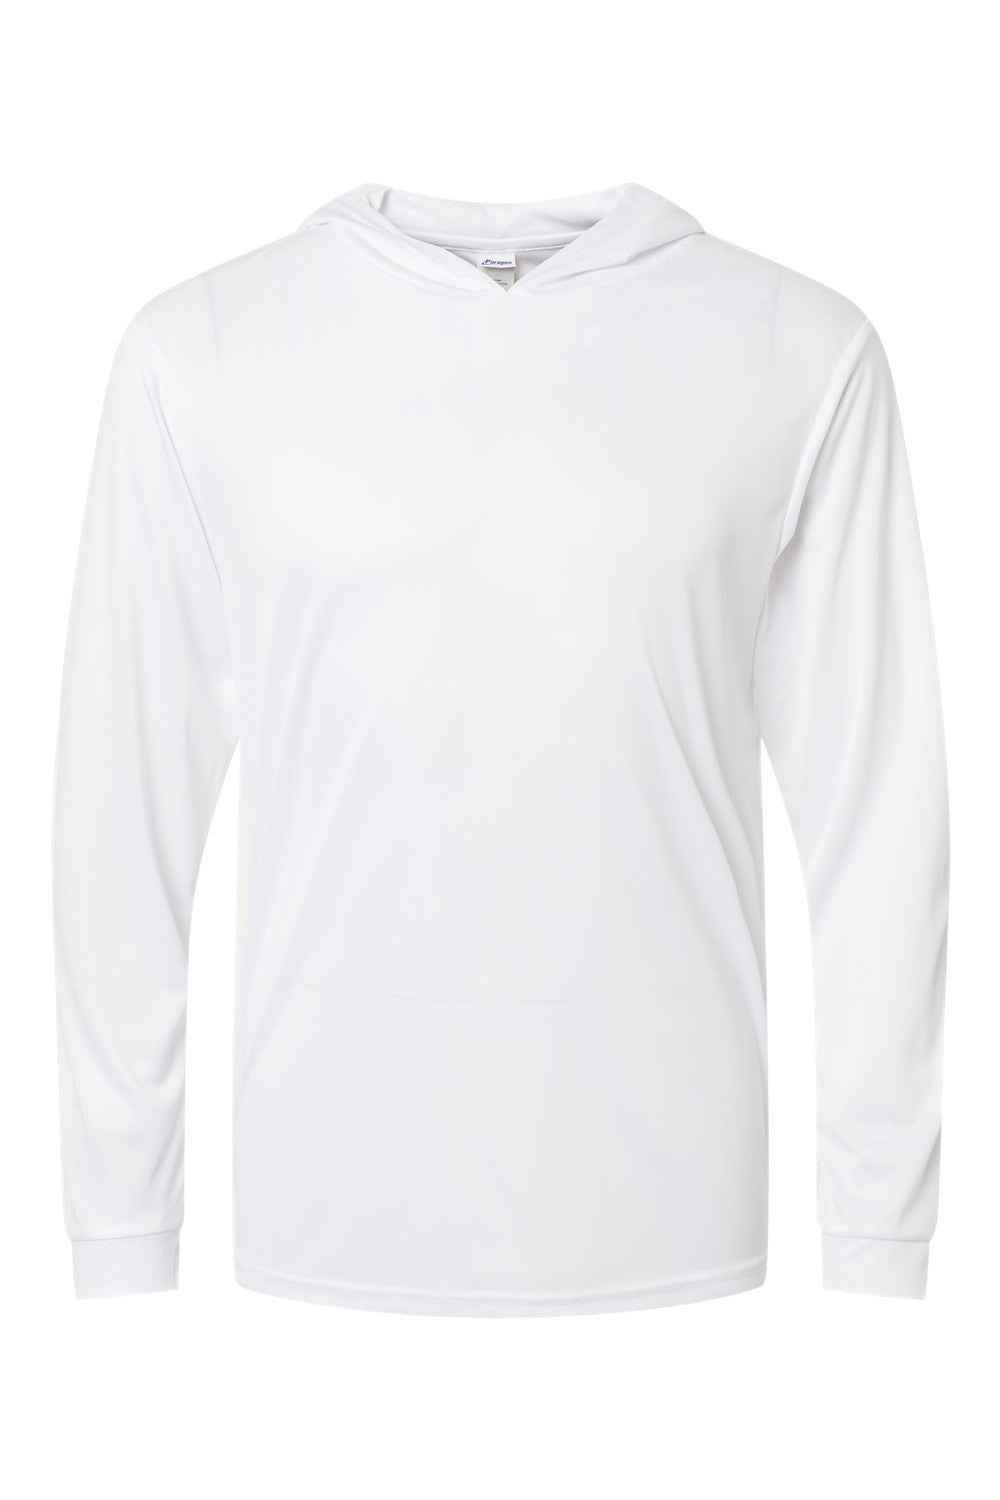 Paragon 220 Mens Bahama Performance Long Sleeve Hooded T-Shirt Hoodie White Flat Front